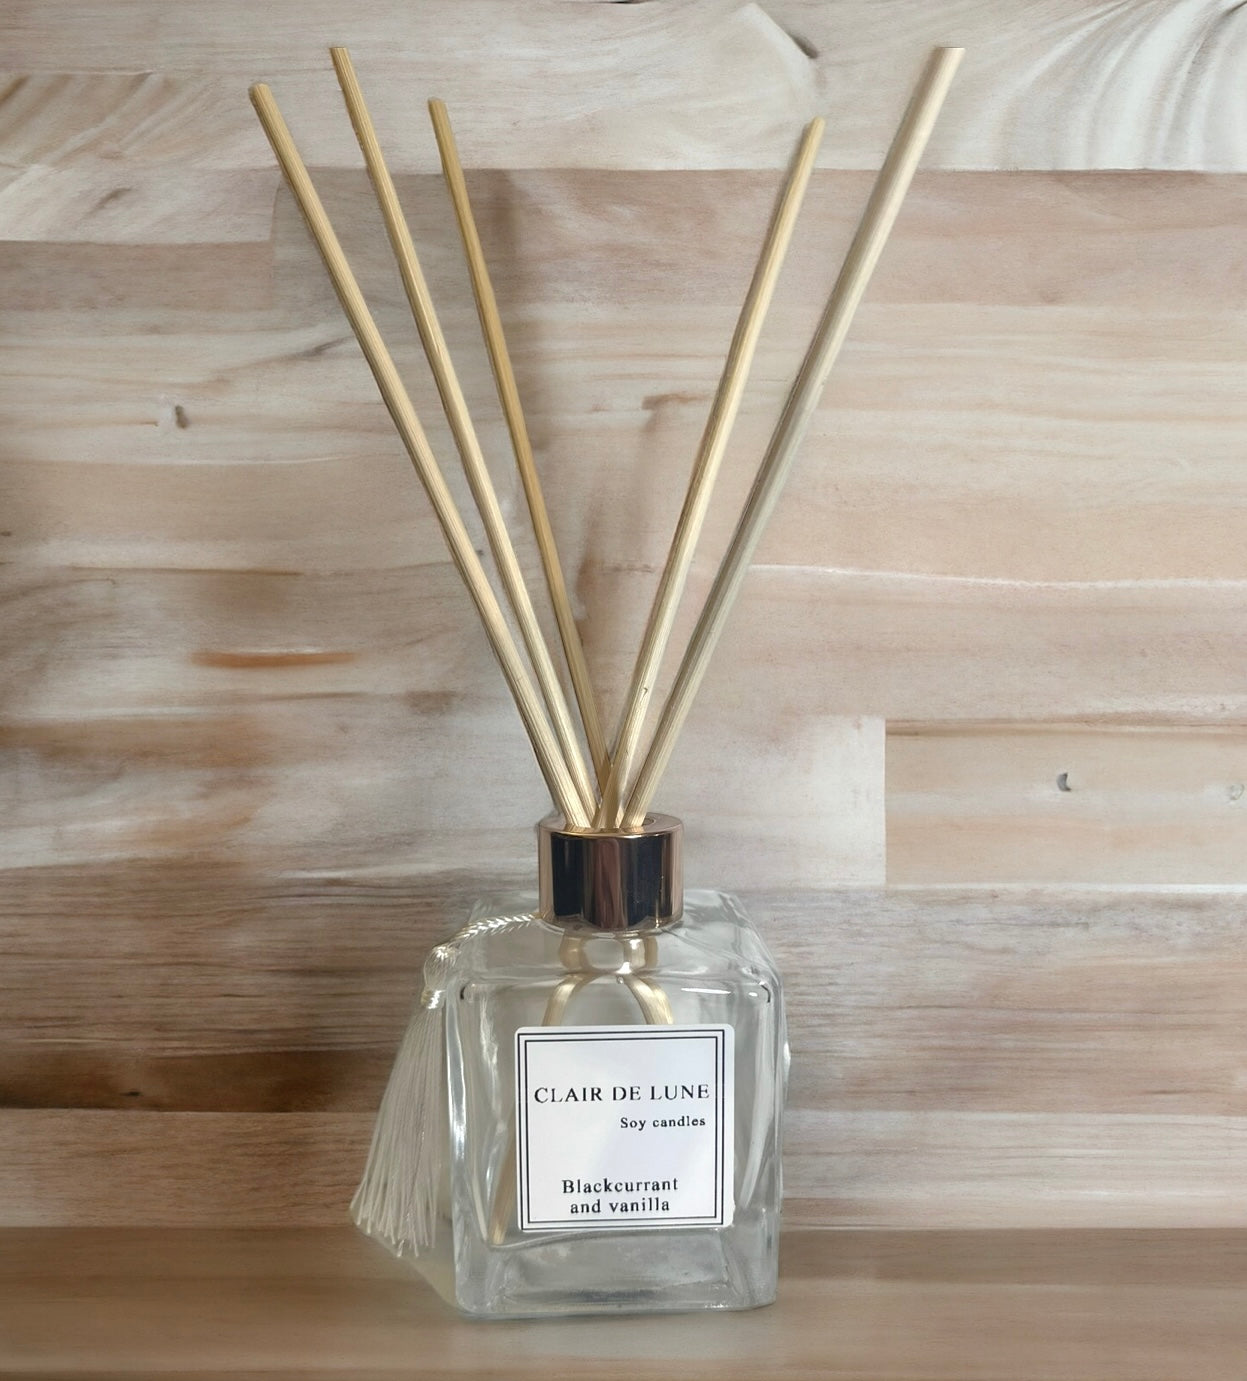 Alien by Thierry Mugler dupe - Diffusers